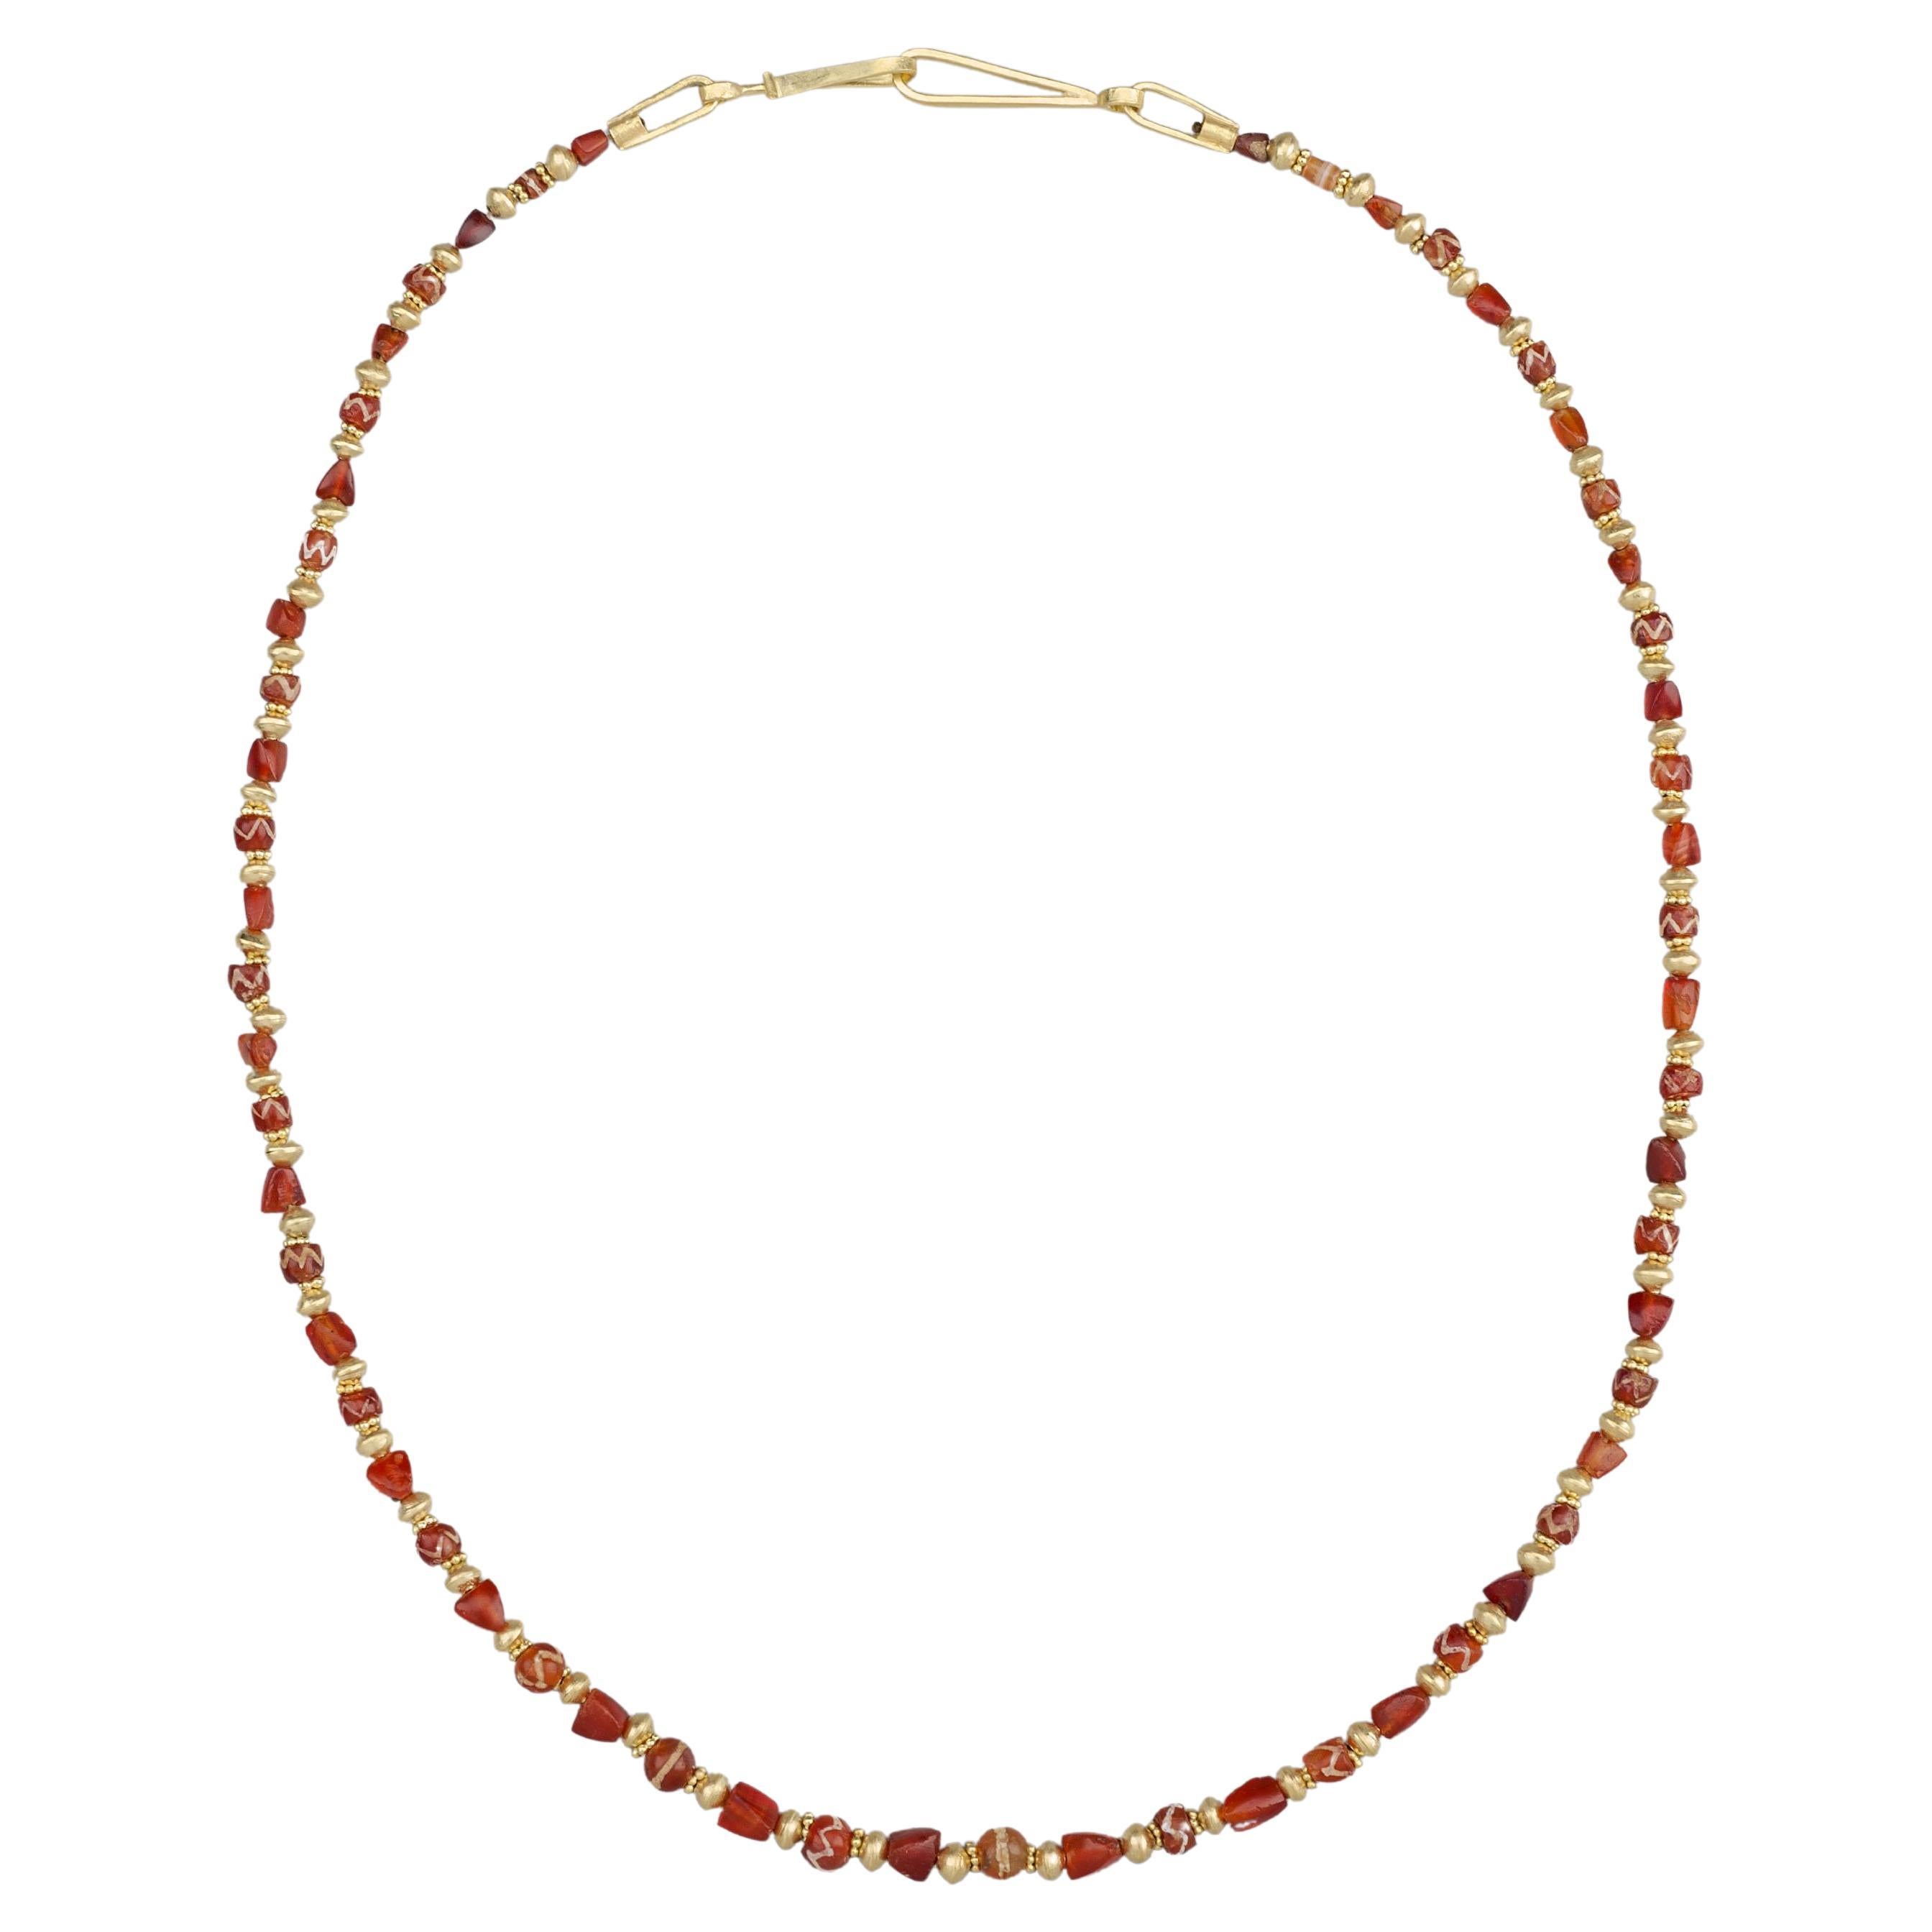 Ancient "Etched" Carnelian Beads with 20k Gold Beads and Clasp For Sale